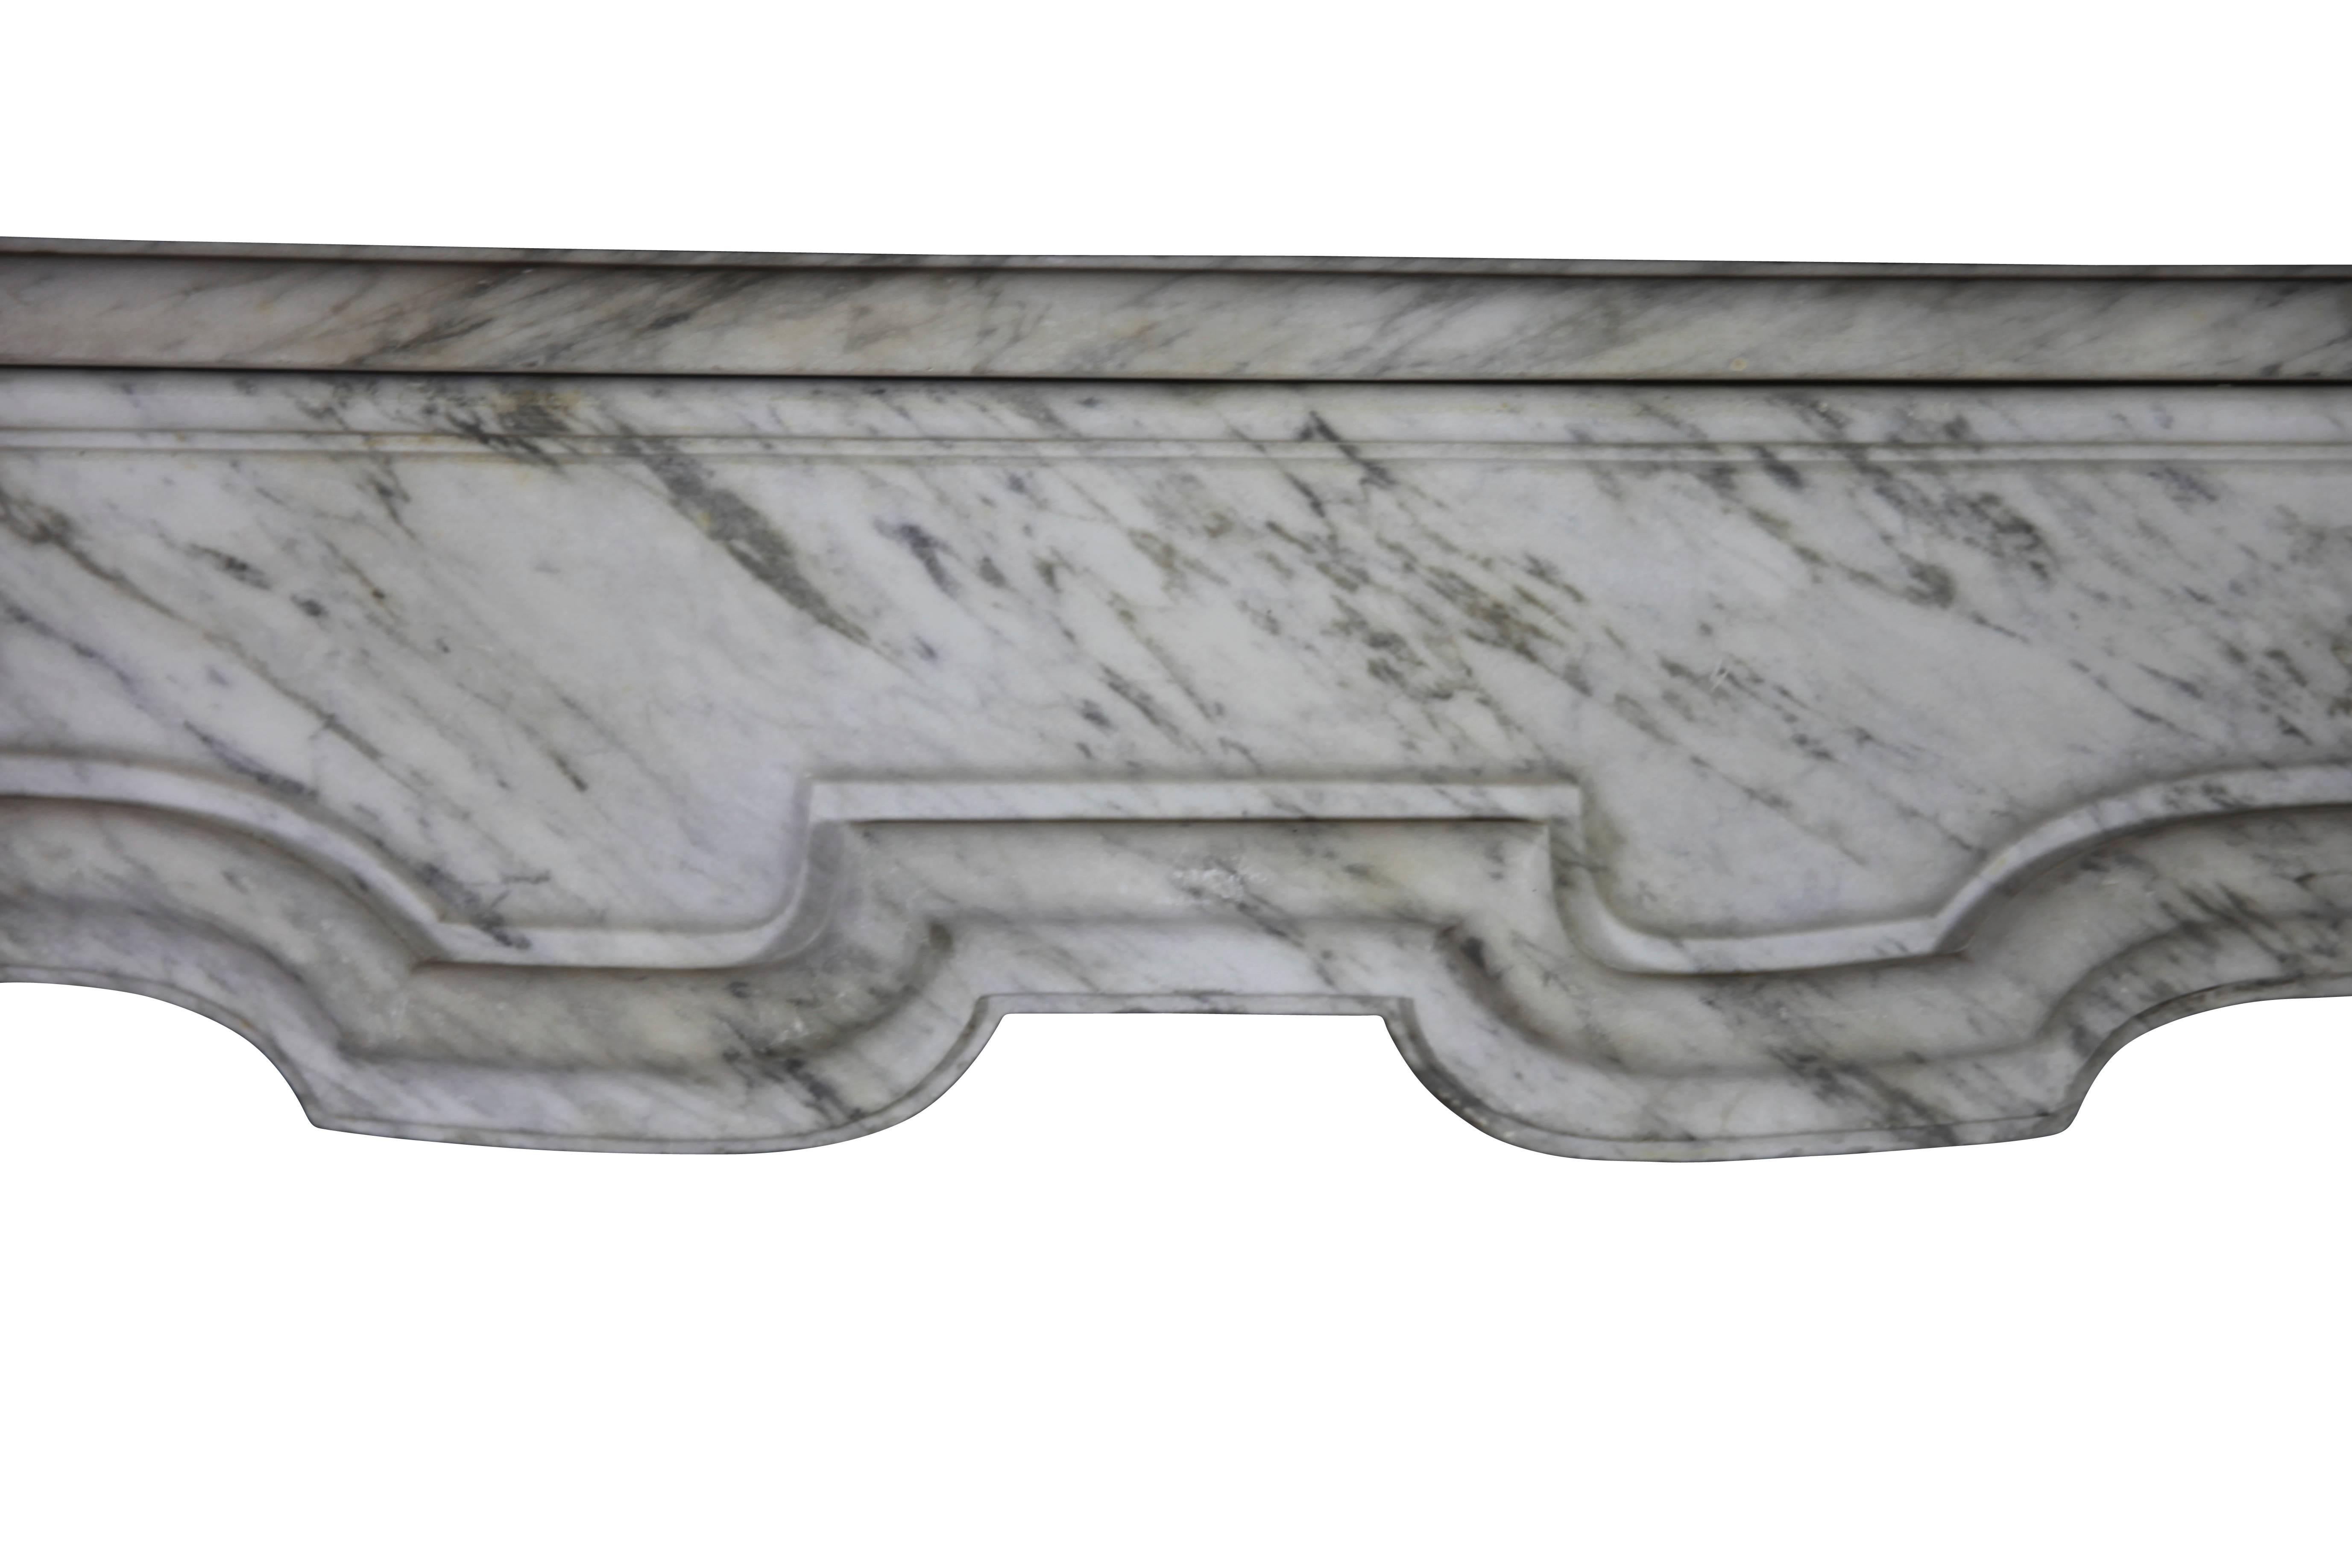 This stylish and fine Italian antique fireplace mantle was built in Arabesk white marble.
Very nice movement and detailed carving. Can be used in different interior design concepts.
Measures:
165 cm EW 64.96